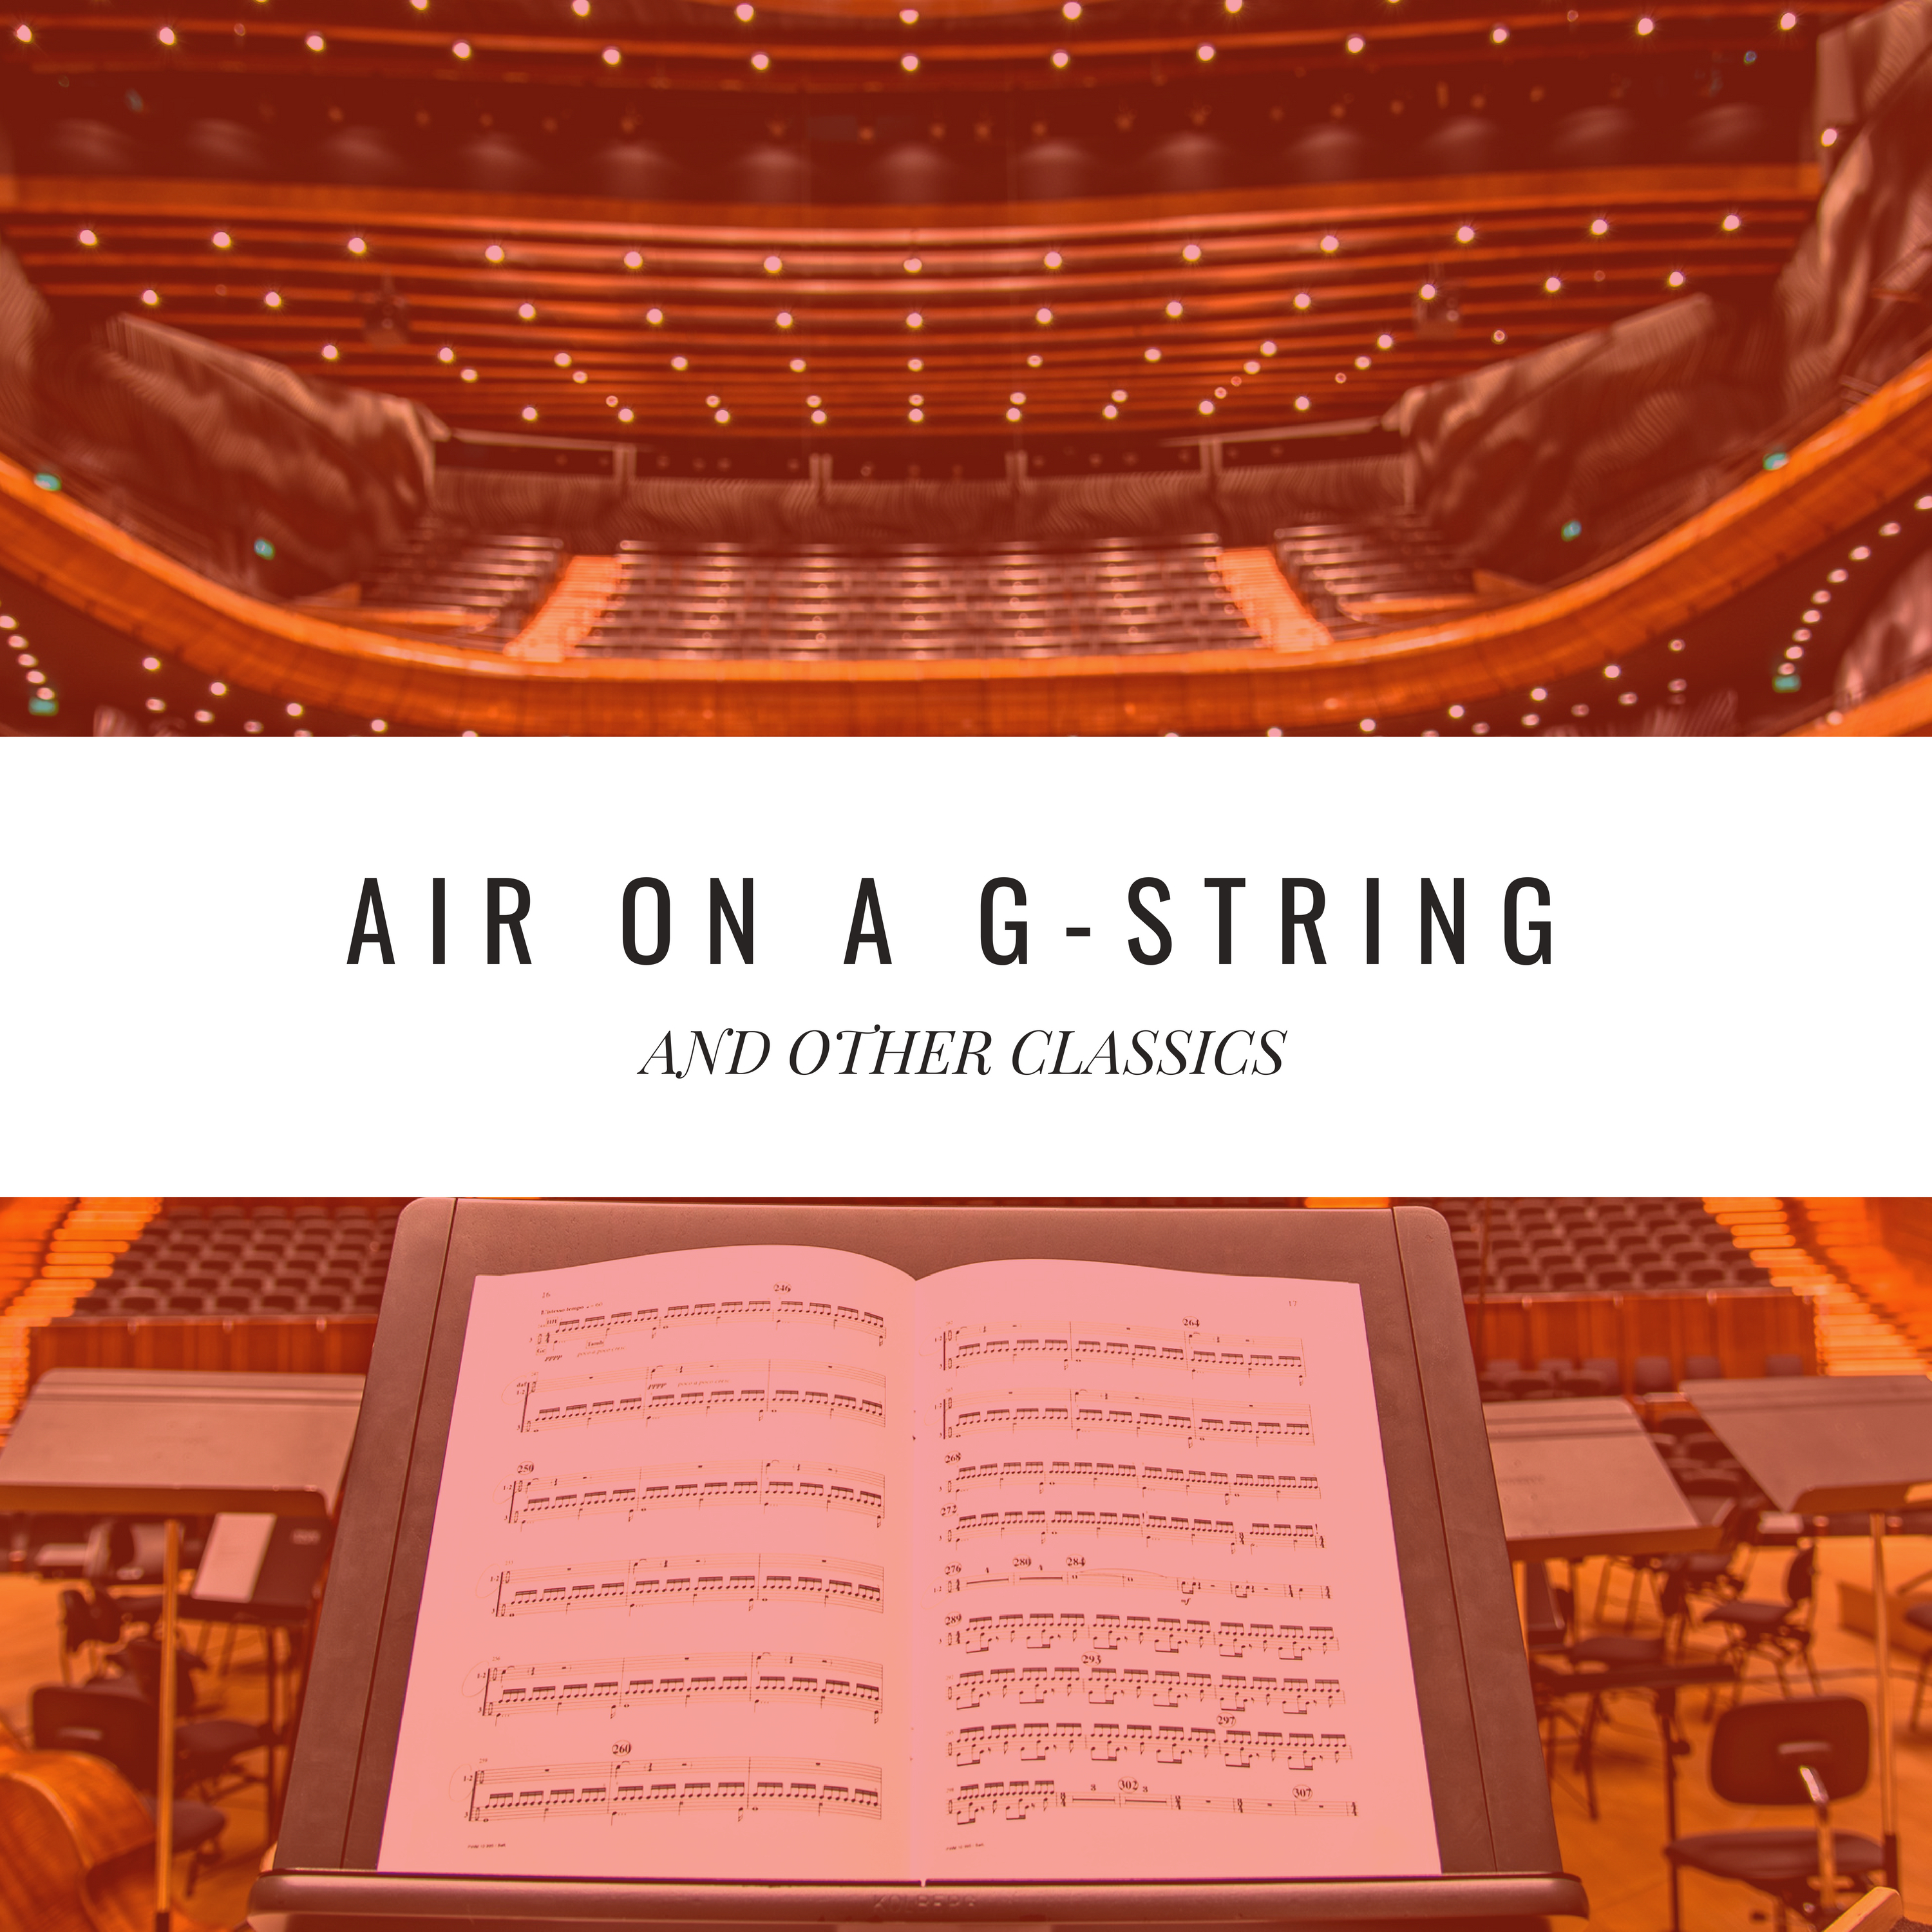 Orchestral Suite No. 3 in D Major, BWV 1068 Air on the G String: II. Air